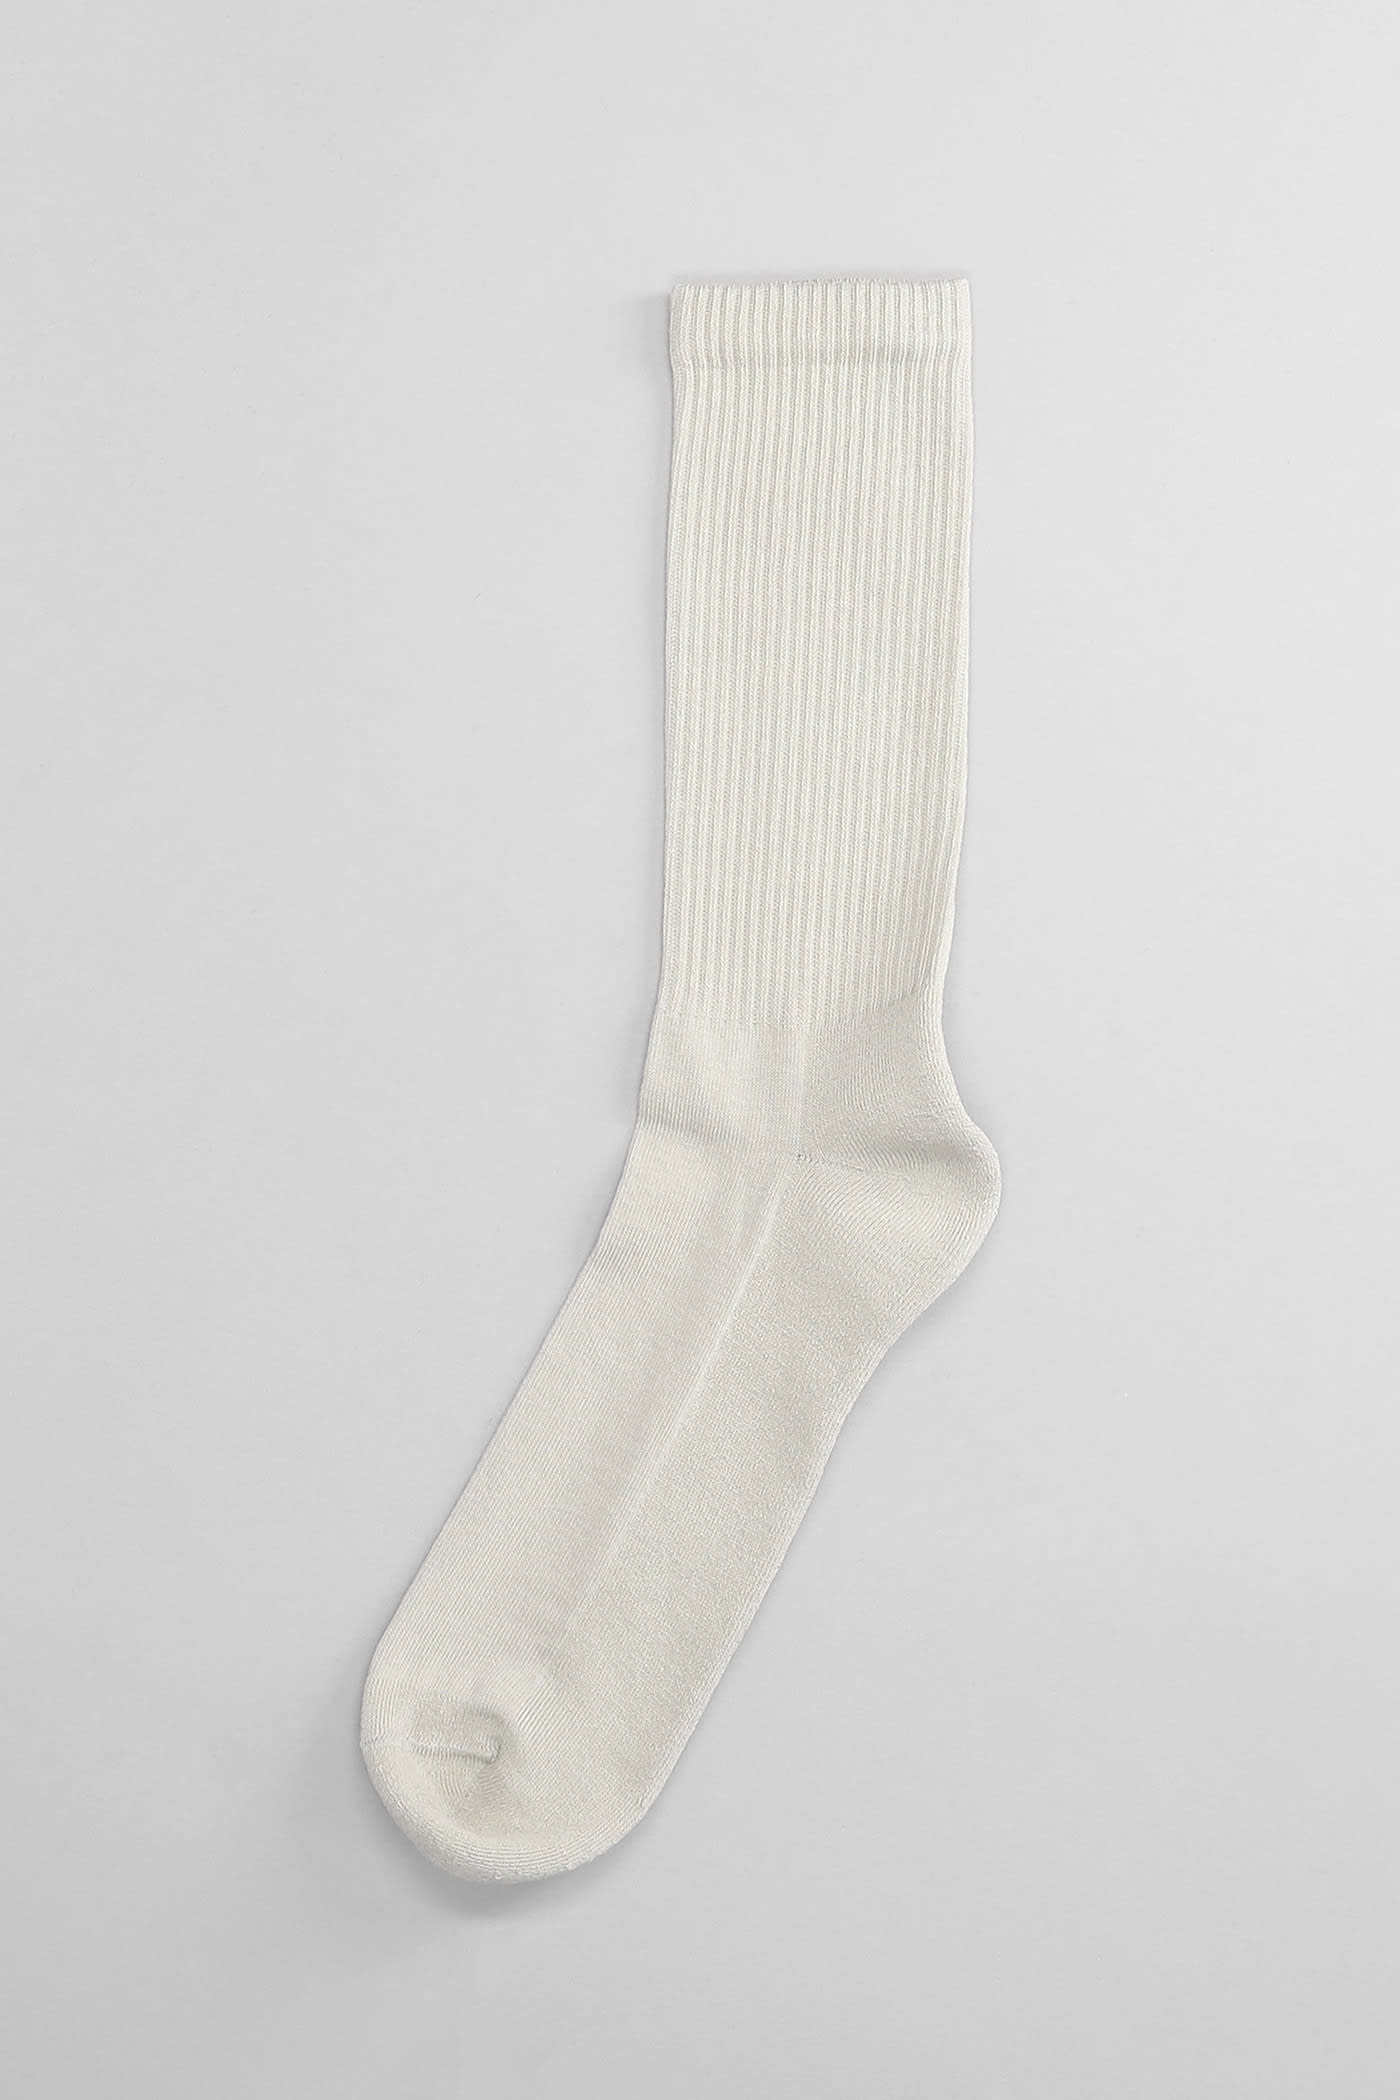 Shop 44 Label Group Socks In Grey Cotton